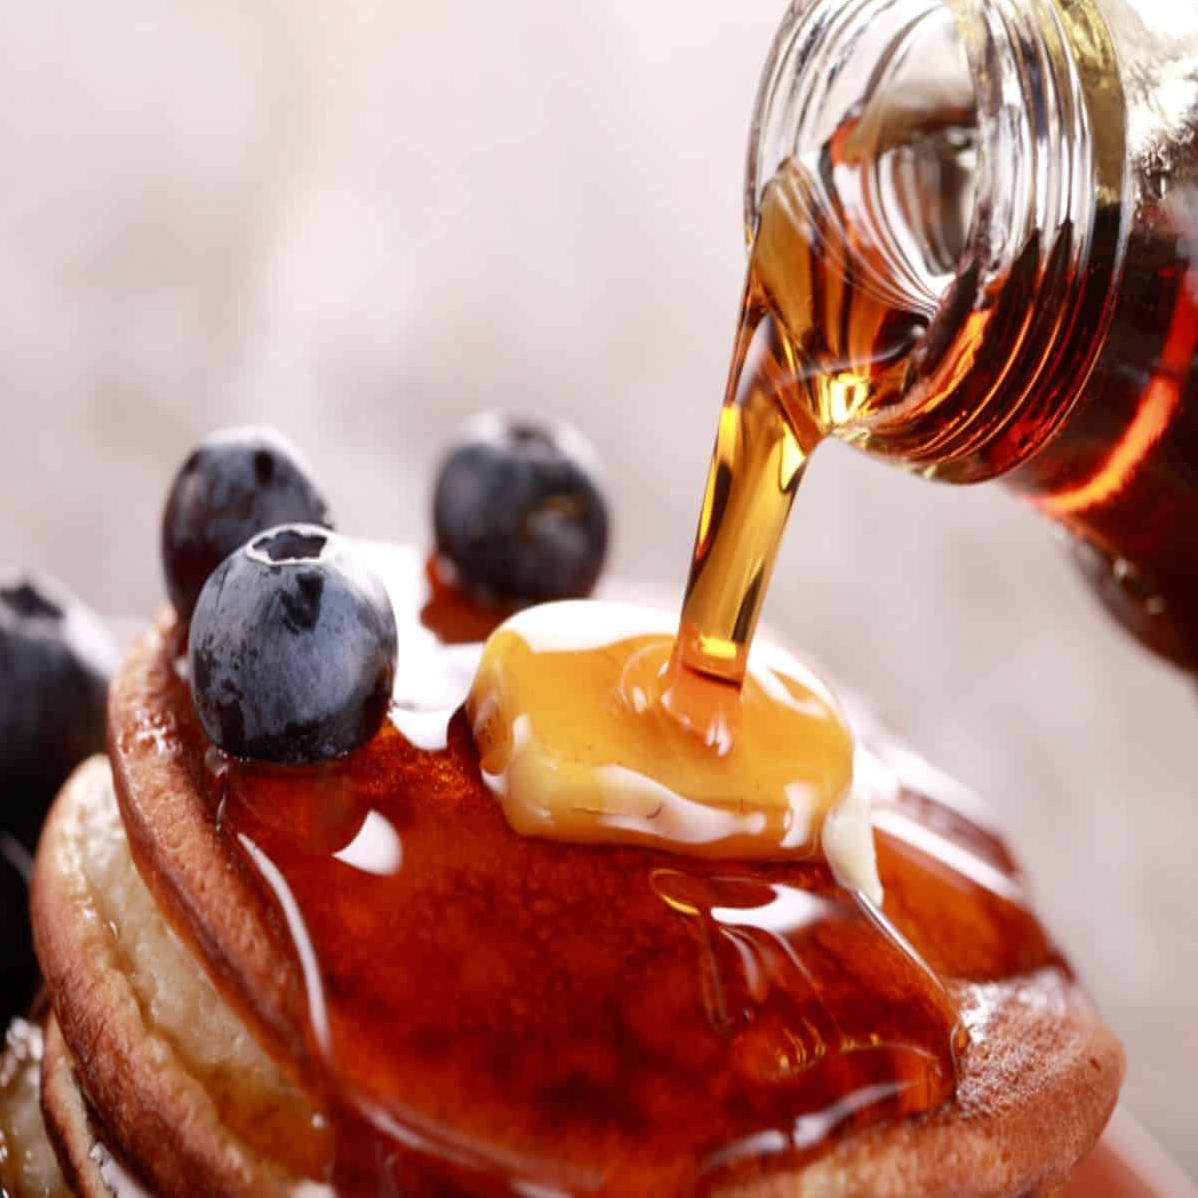  A healthier alternative to traditional maple syrup that still packs a punch of sweetness!